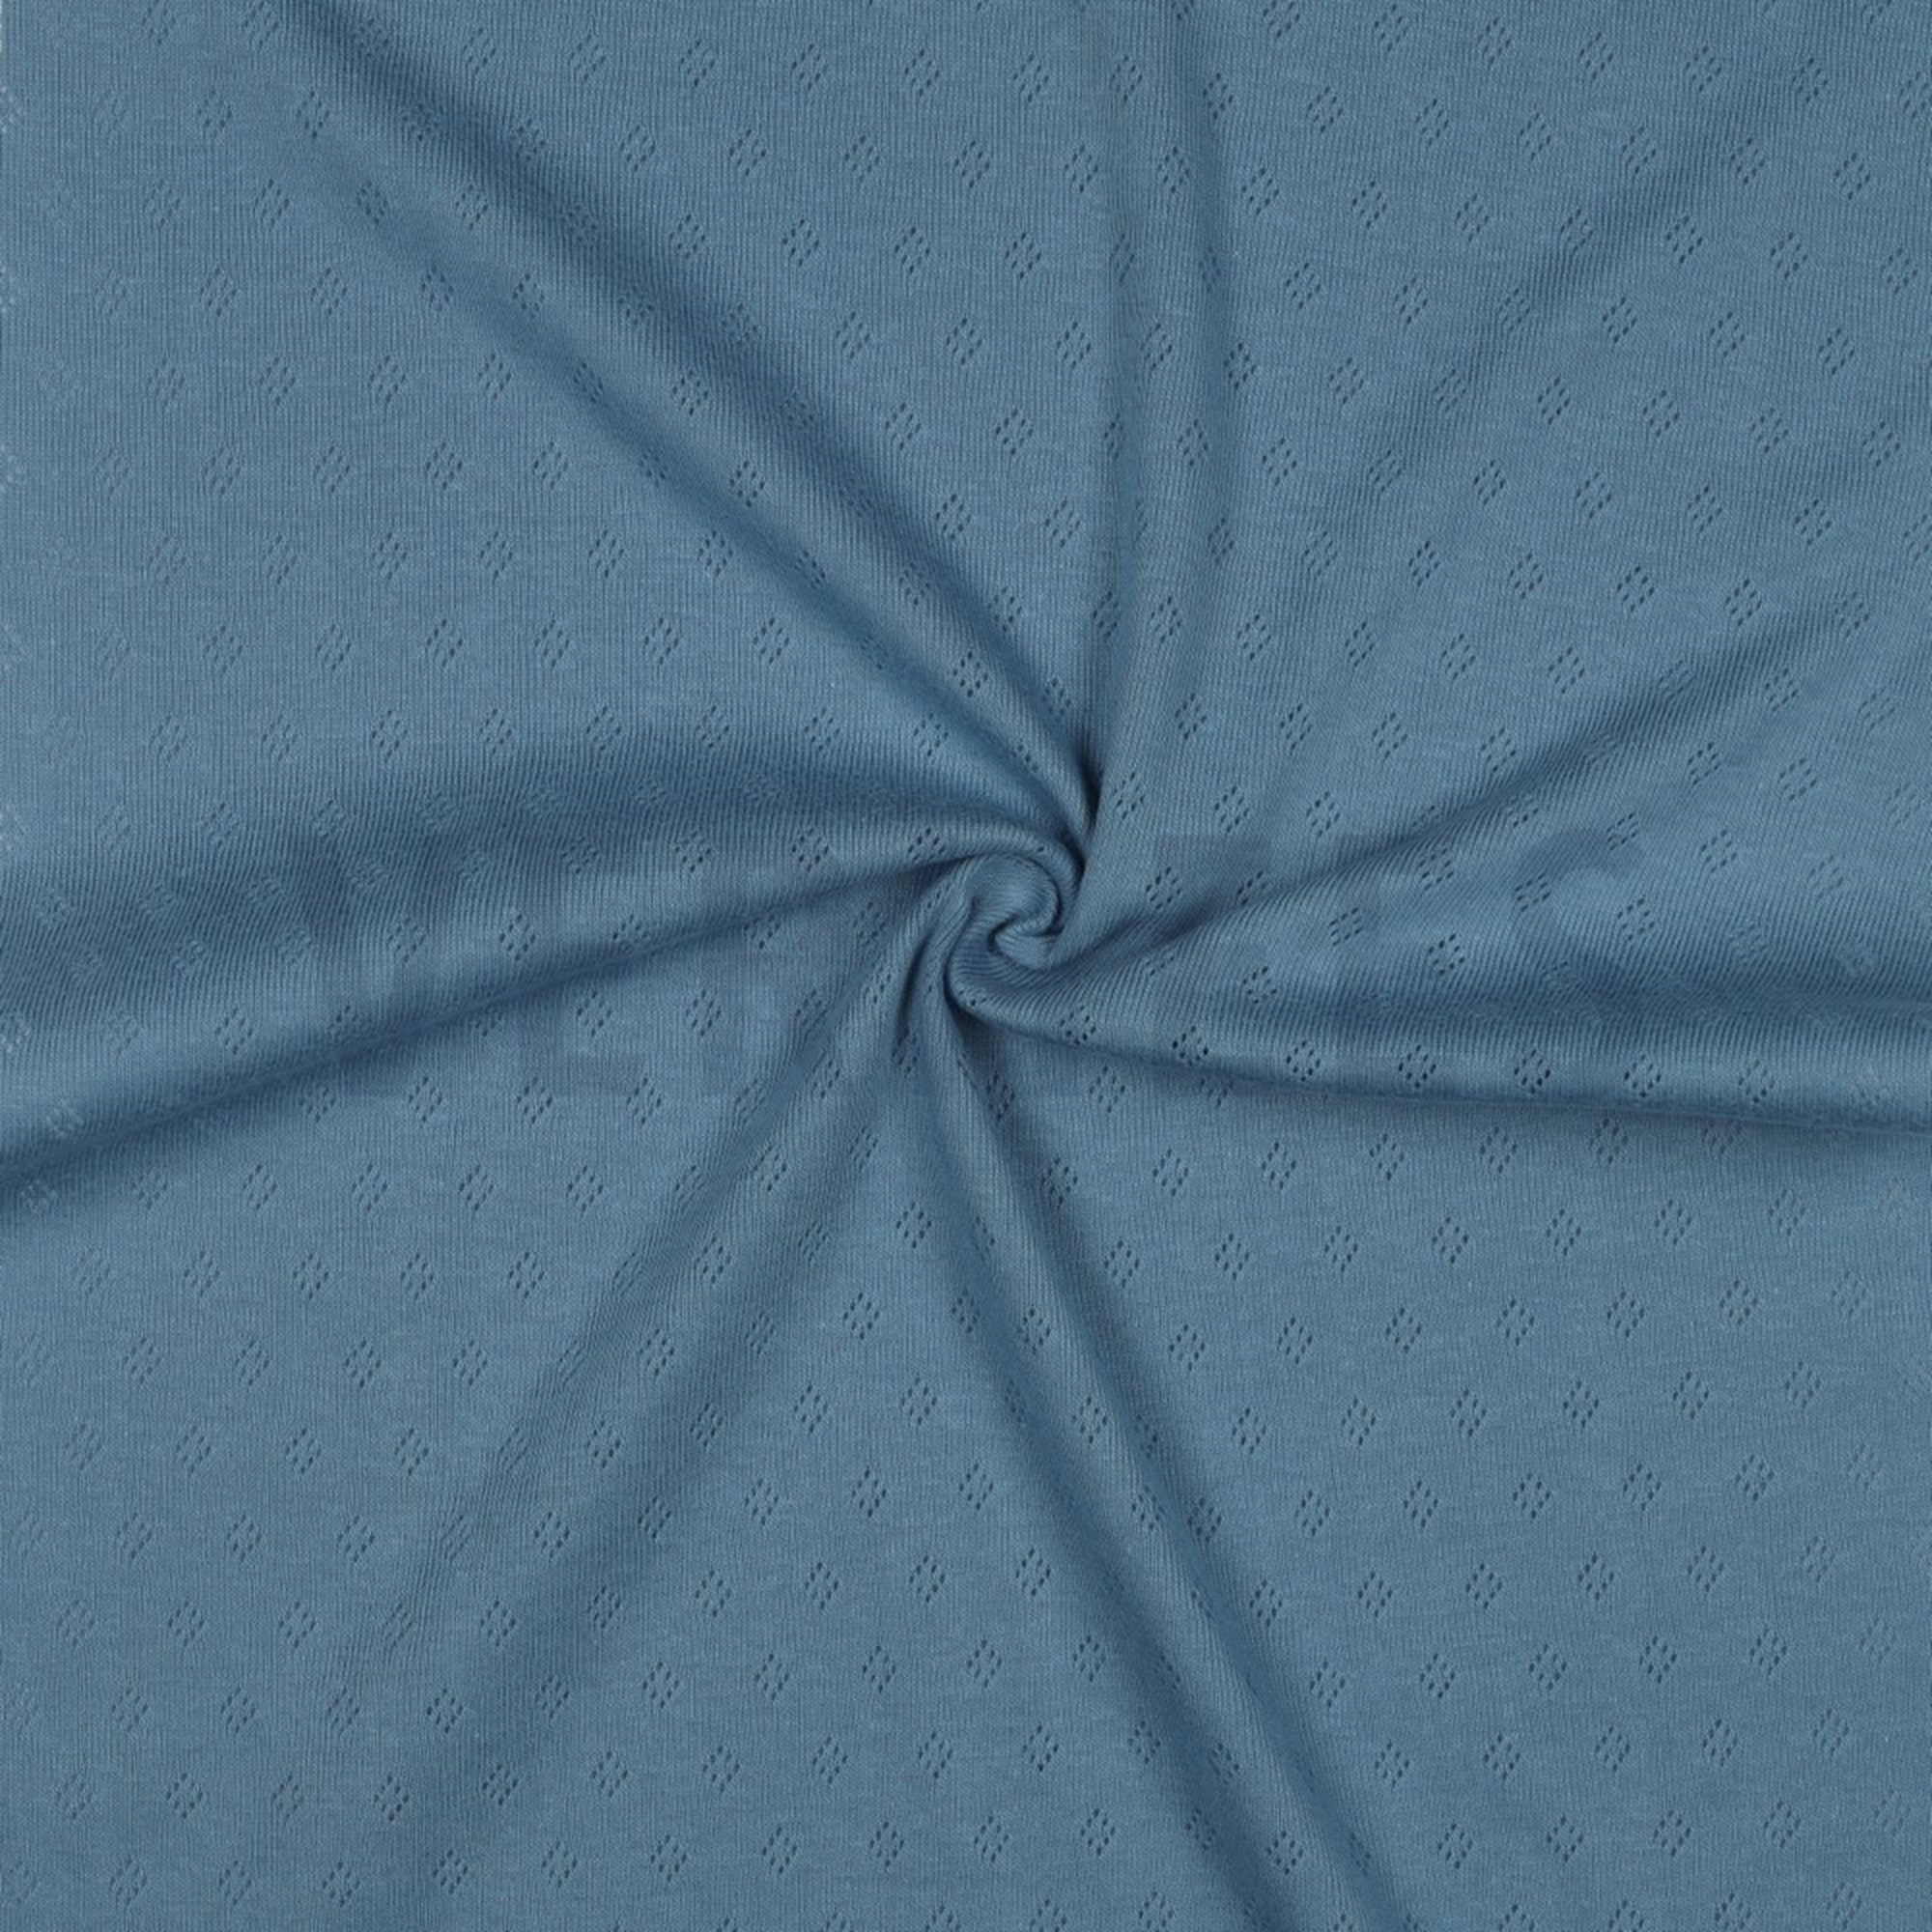 POINTOILLE BLUE (high resolution) #3